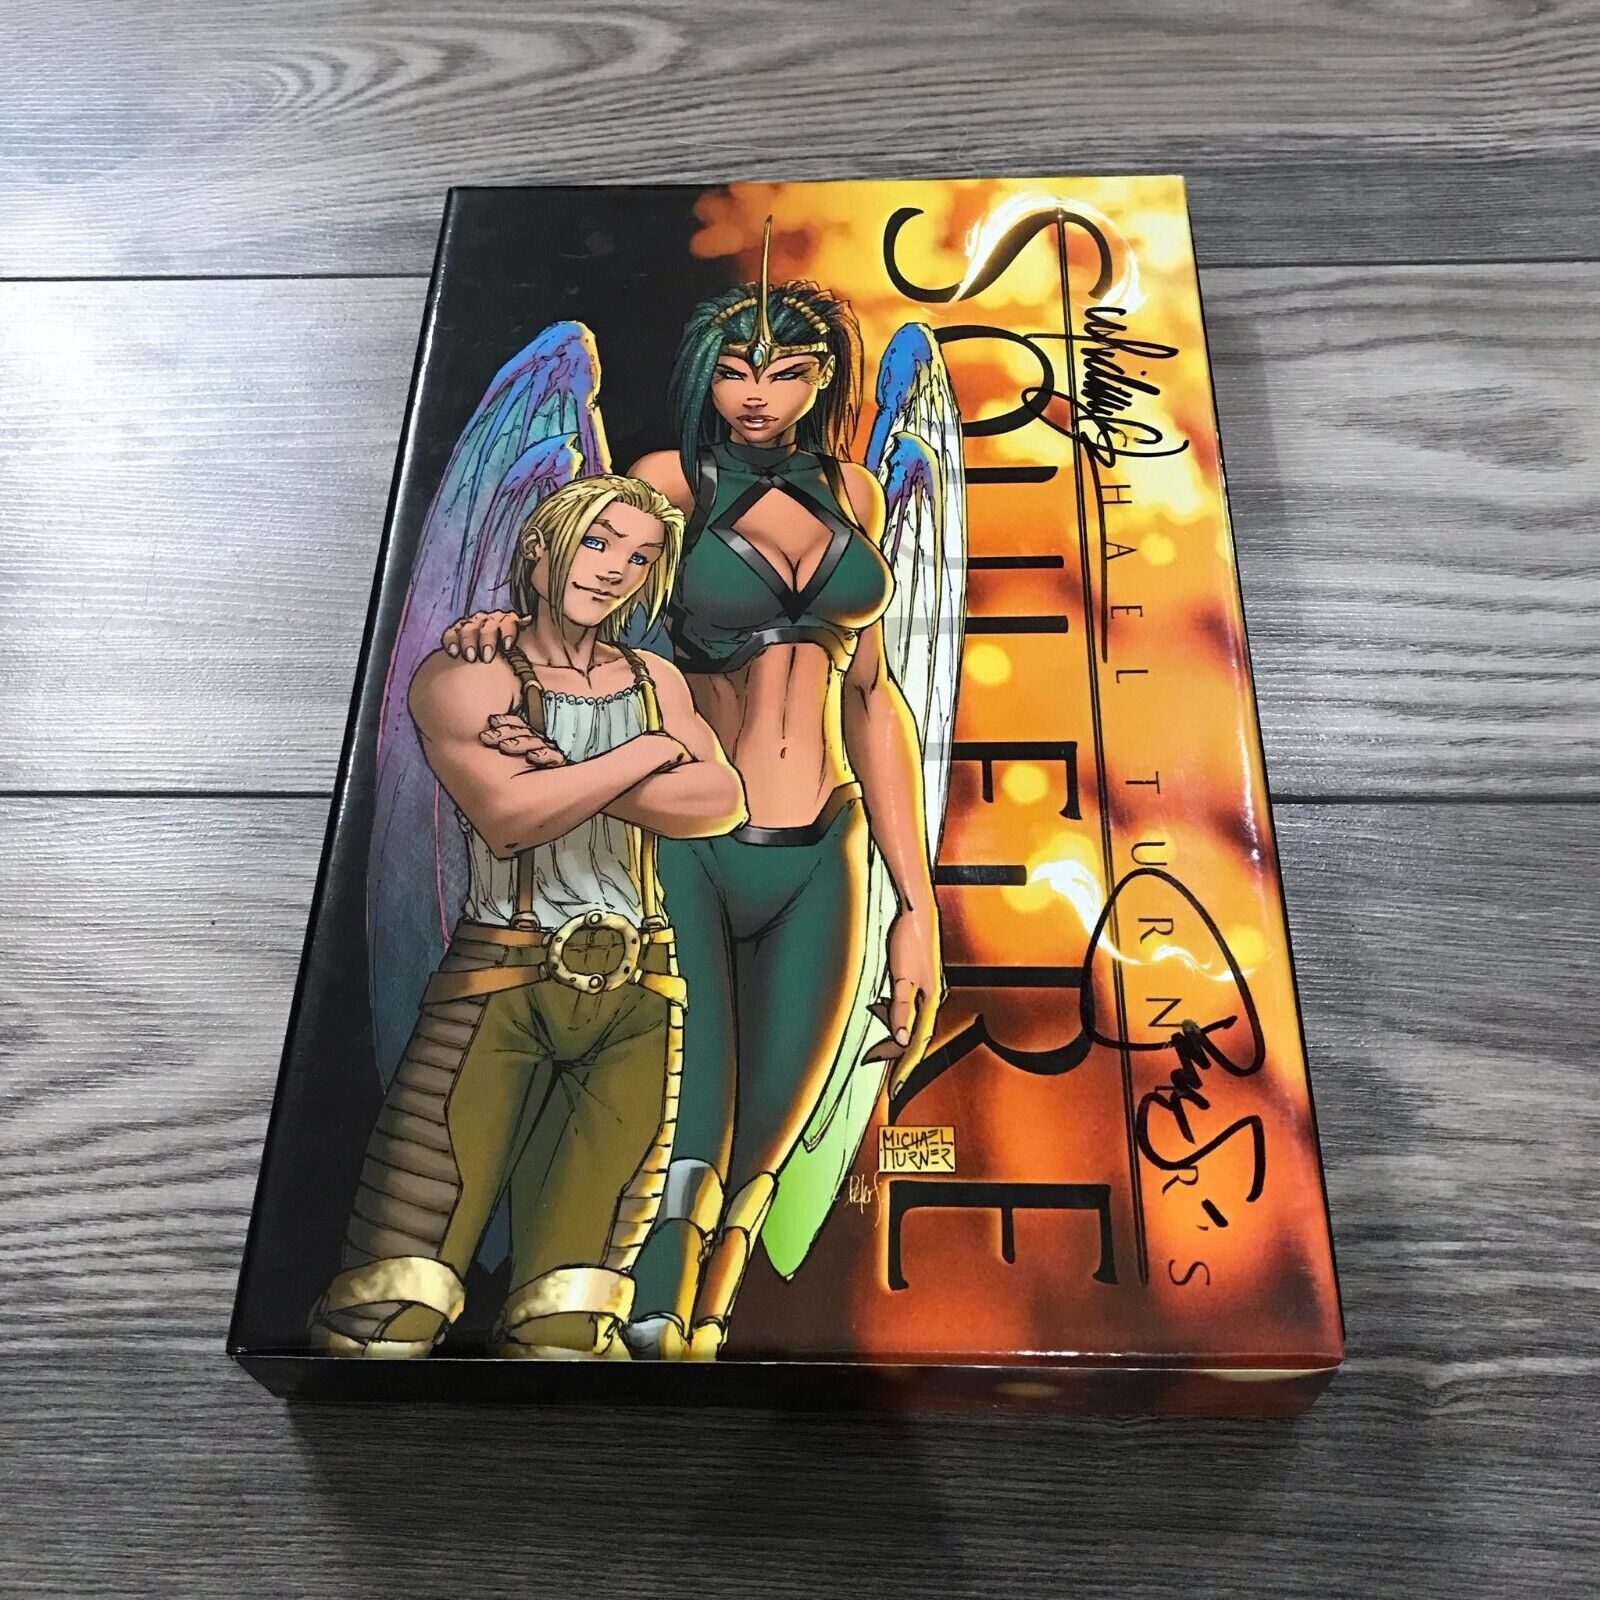 Aspen Soulfire Signed Slipcase Cllection Edition - Like New 322/500